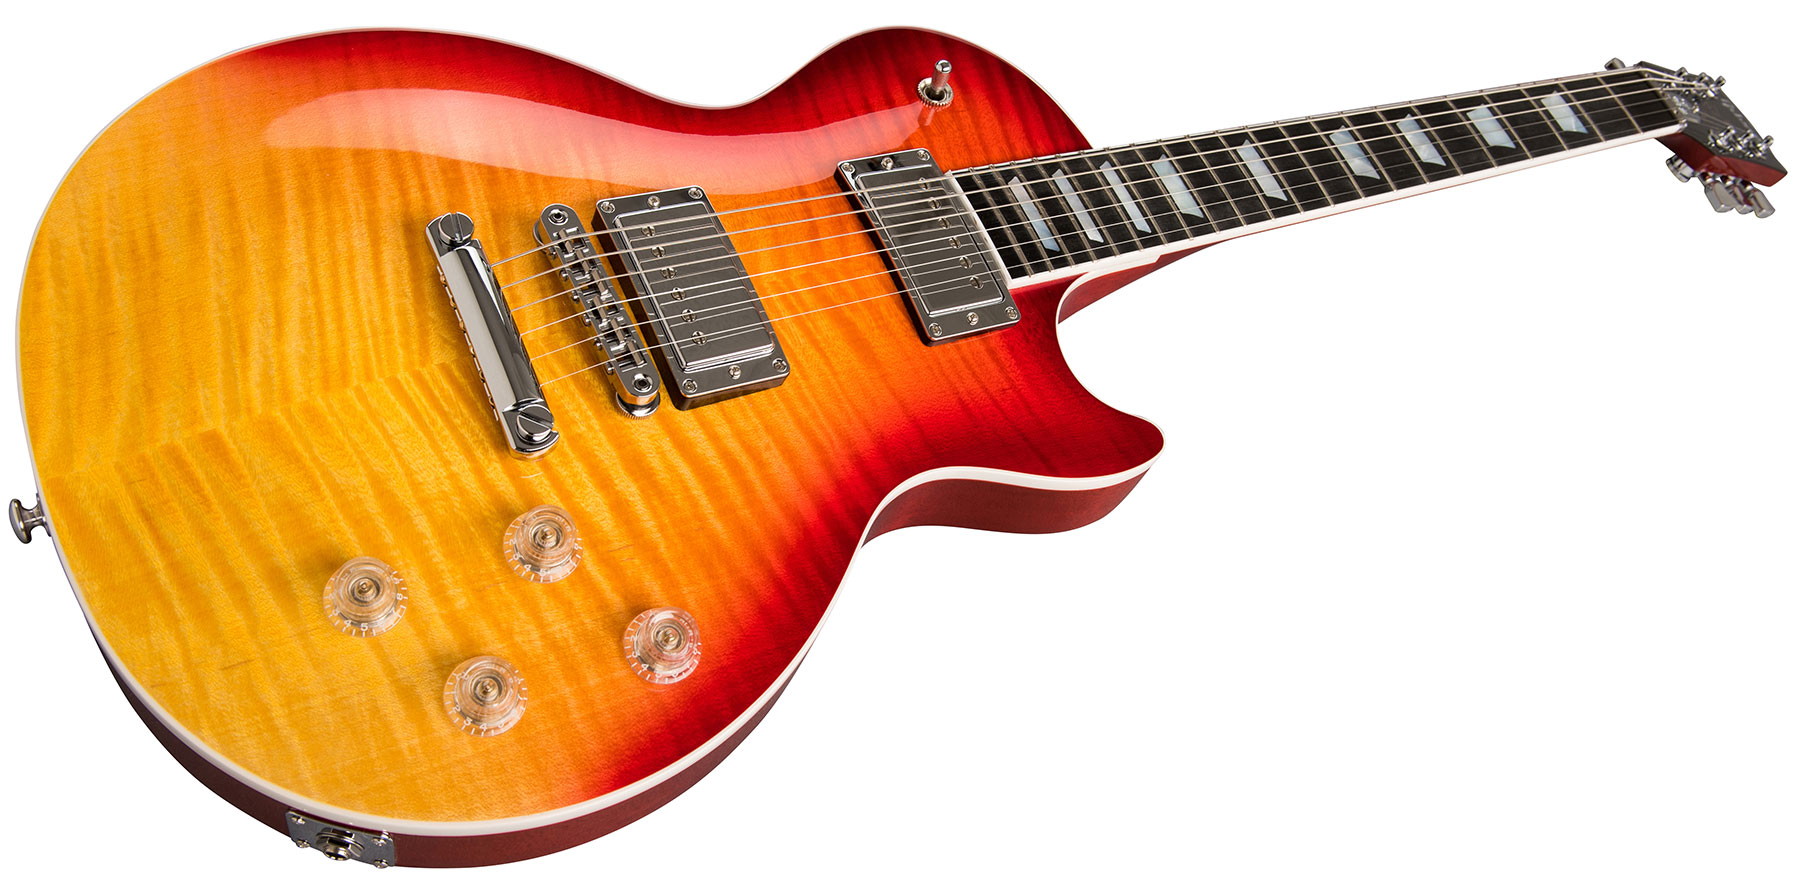 Gibson Les Paul Hp-ii High Performance 2019 2h Ht Ric - Heritage Cherry Fade - Single cut electric guitar - Variation 1